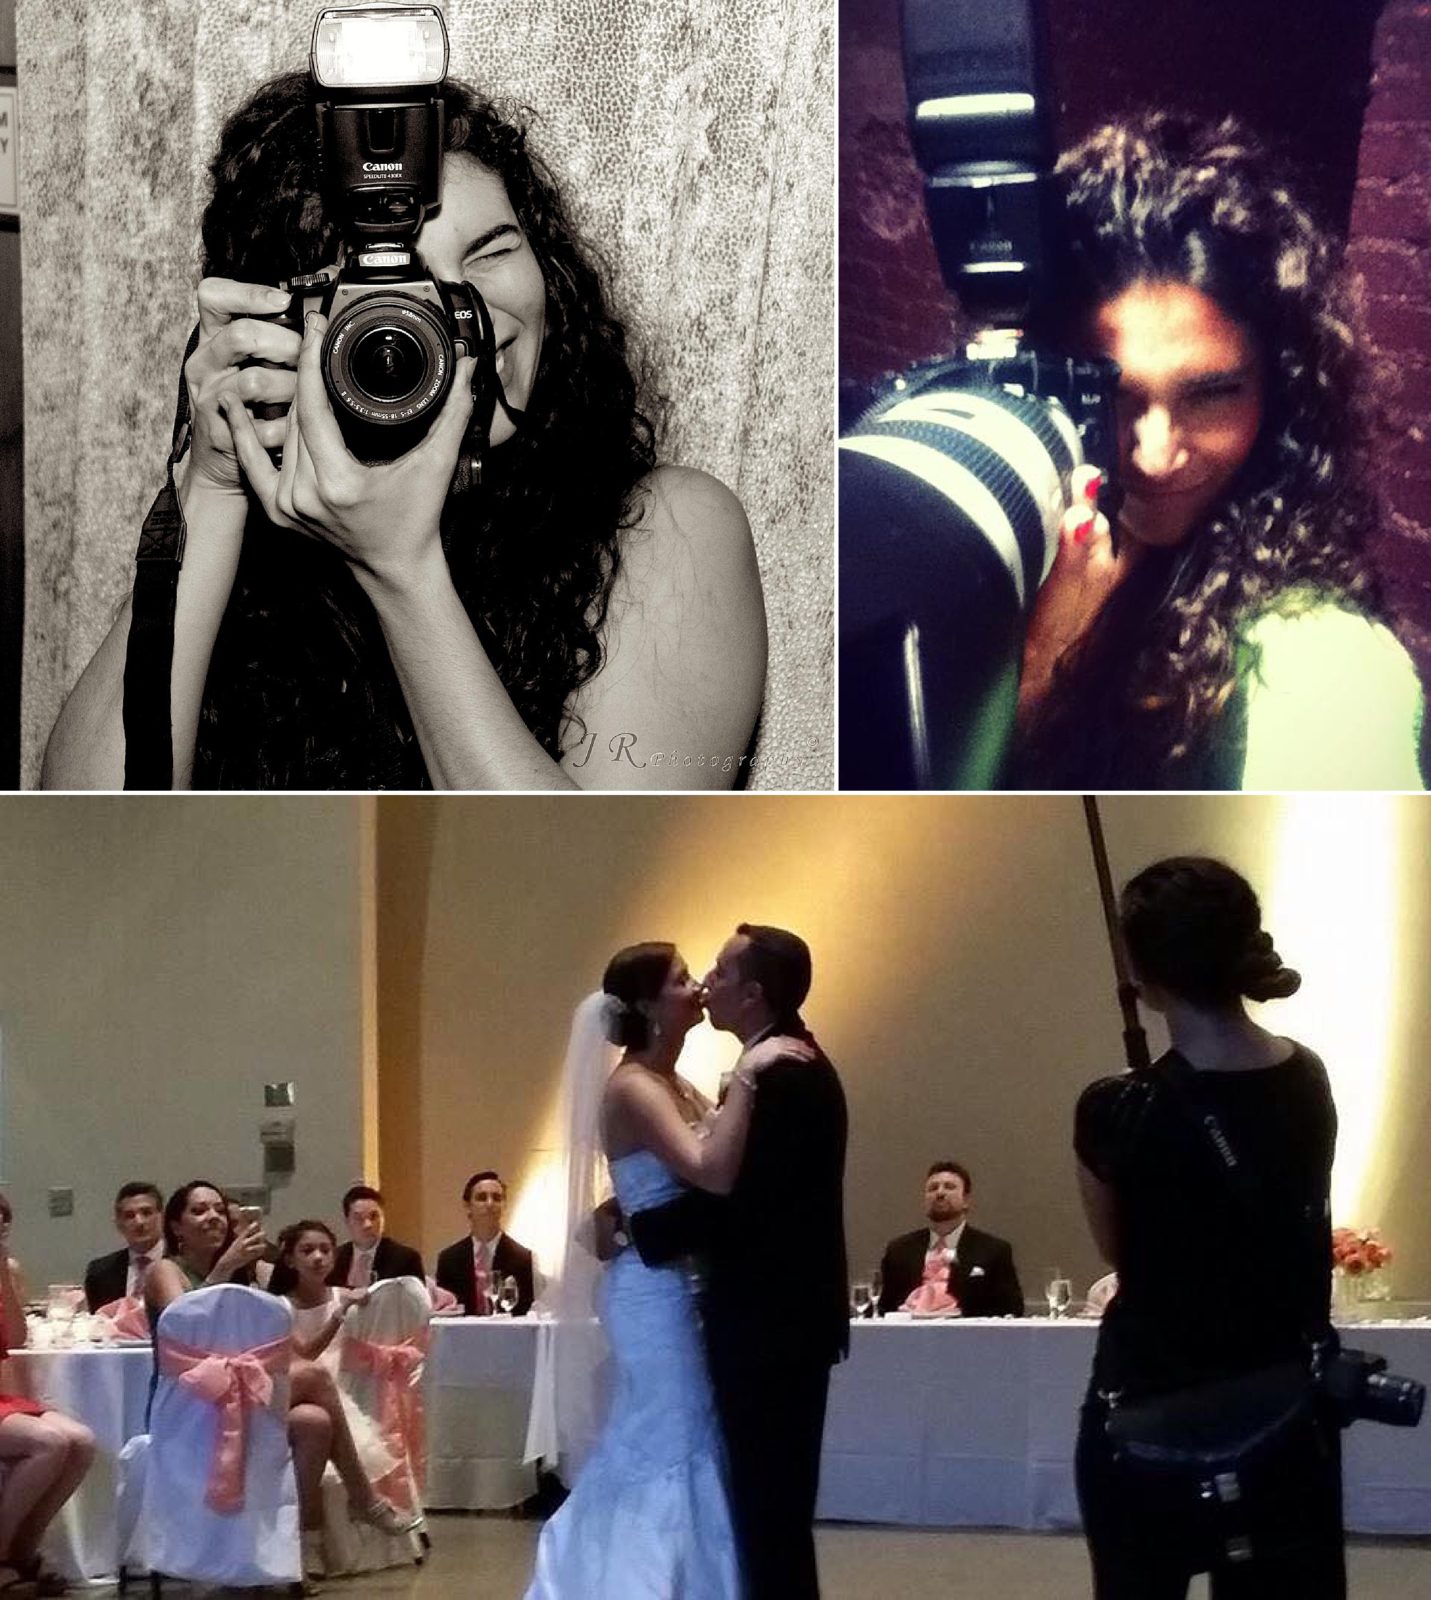 Wedding and Portrait Photographer based in Florida